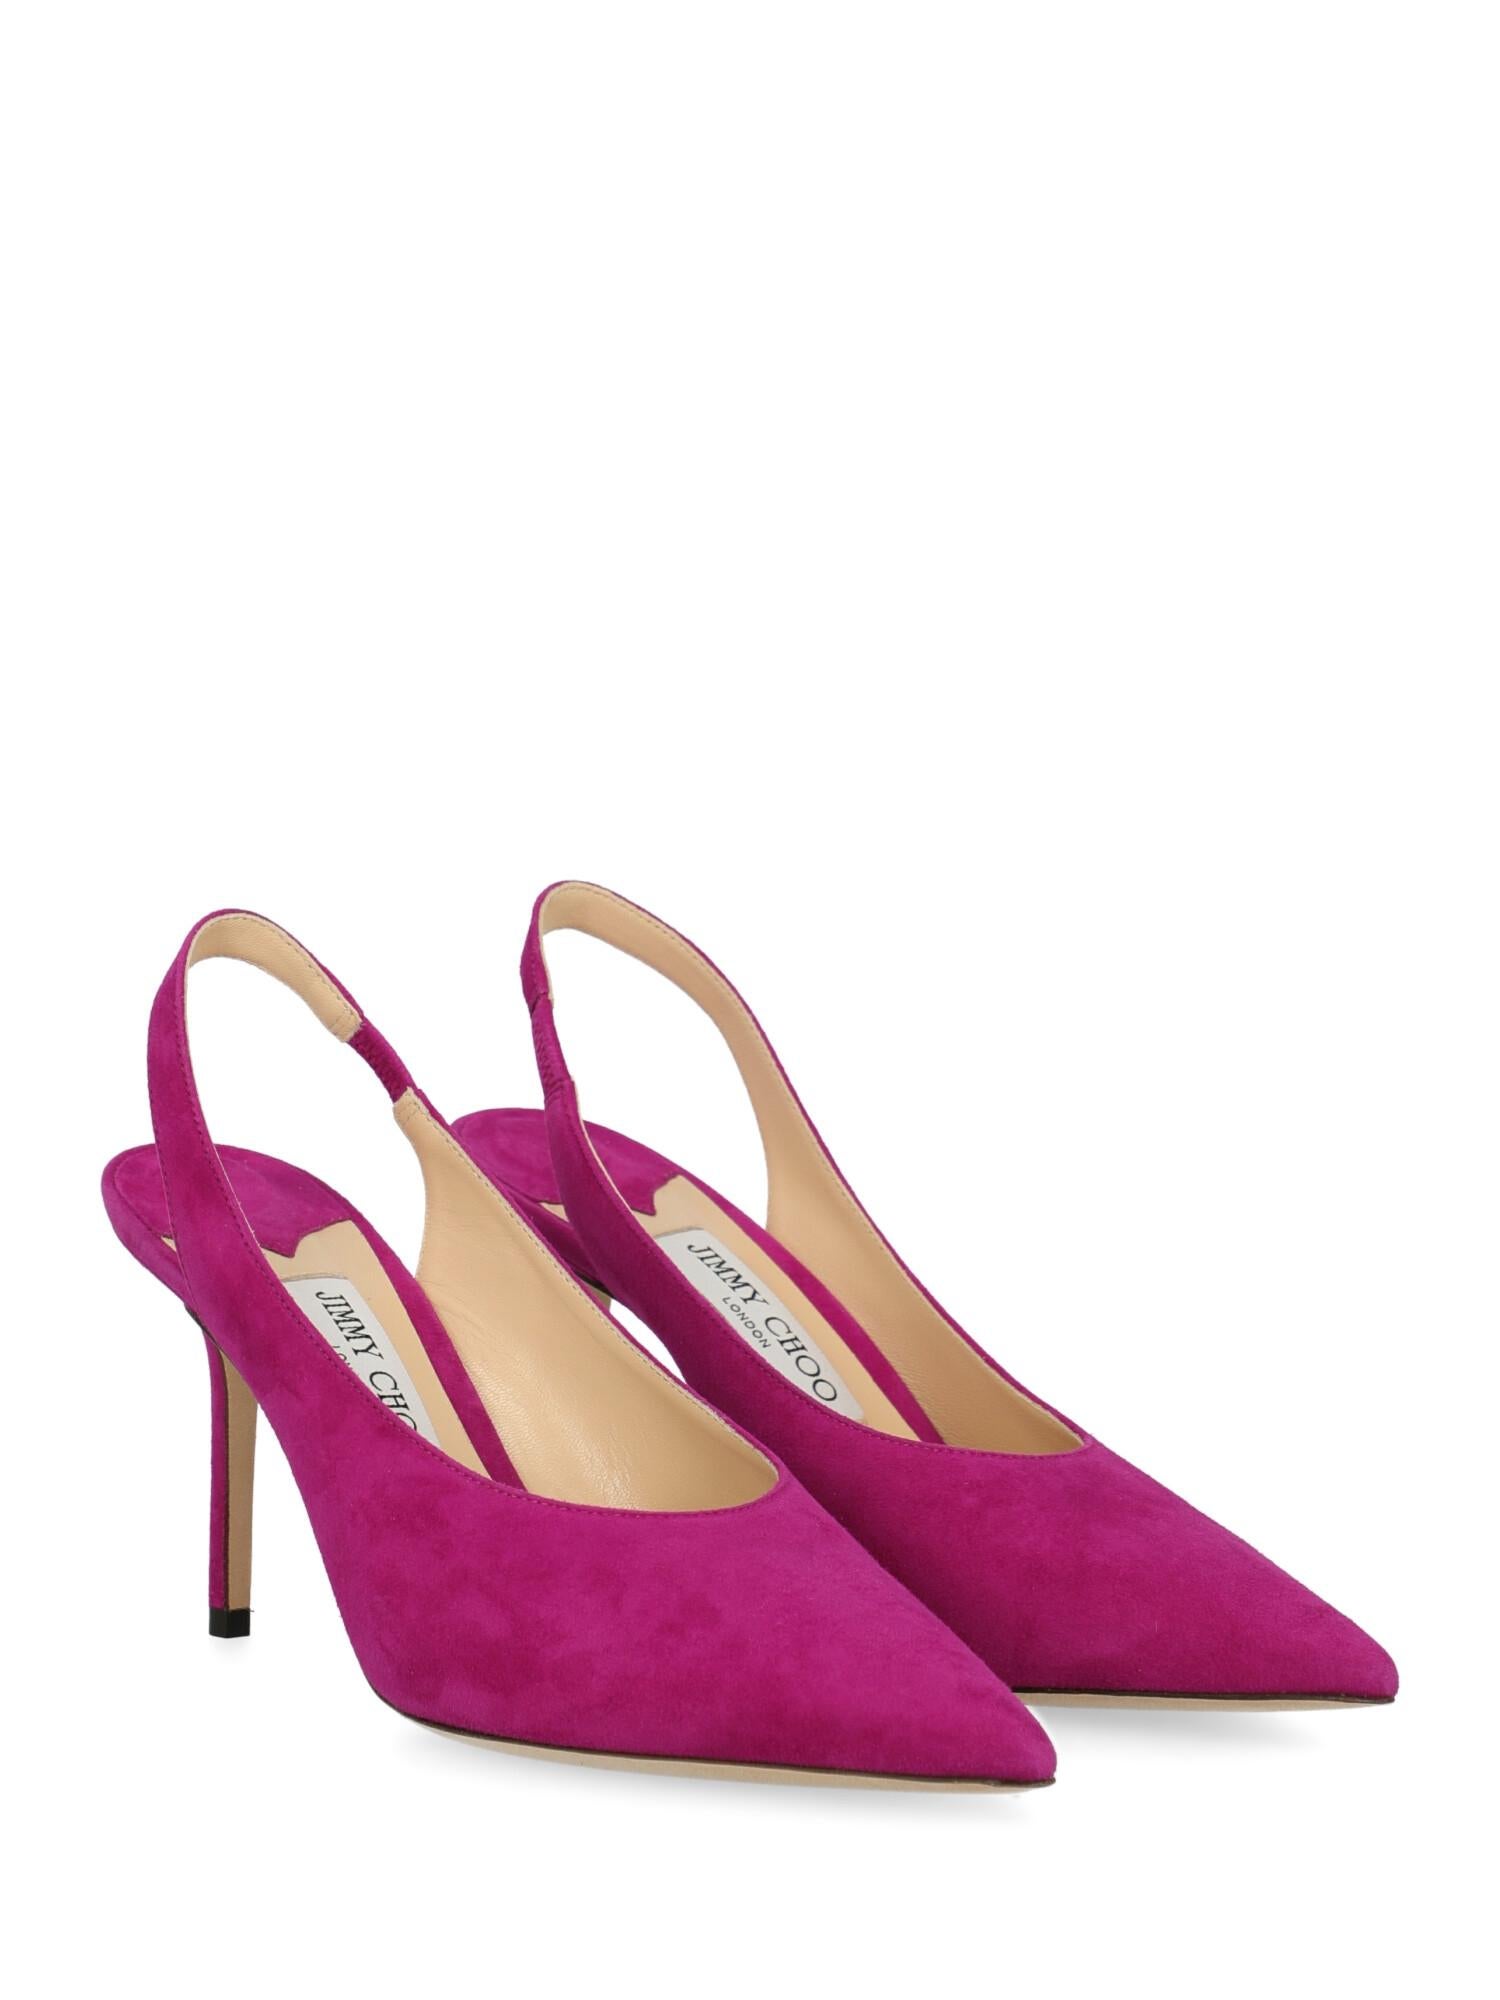 Shoe, leather, solid color, suede, pointed toe.

Includes:
- Box

Product Condition: Excellent
Sole: negligible marks.

Measurements:
Heel Height: 10 cm

Composition:
Upper: 100% Leather
Sole: 100% Leather

Color: Purple
Product ID: XU80011696